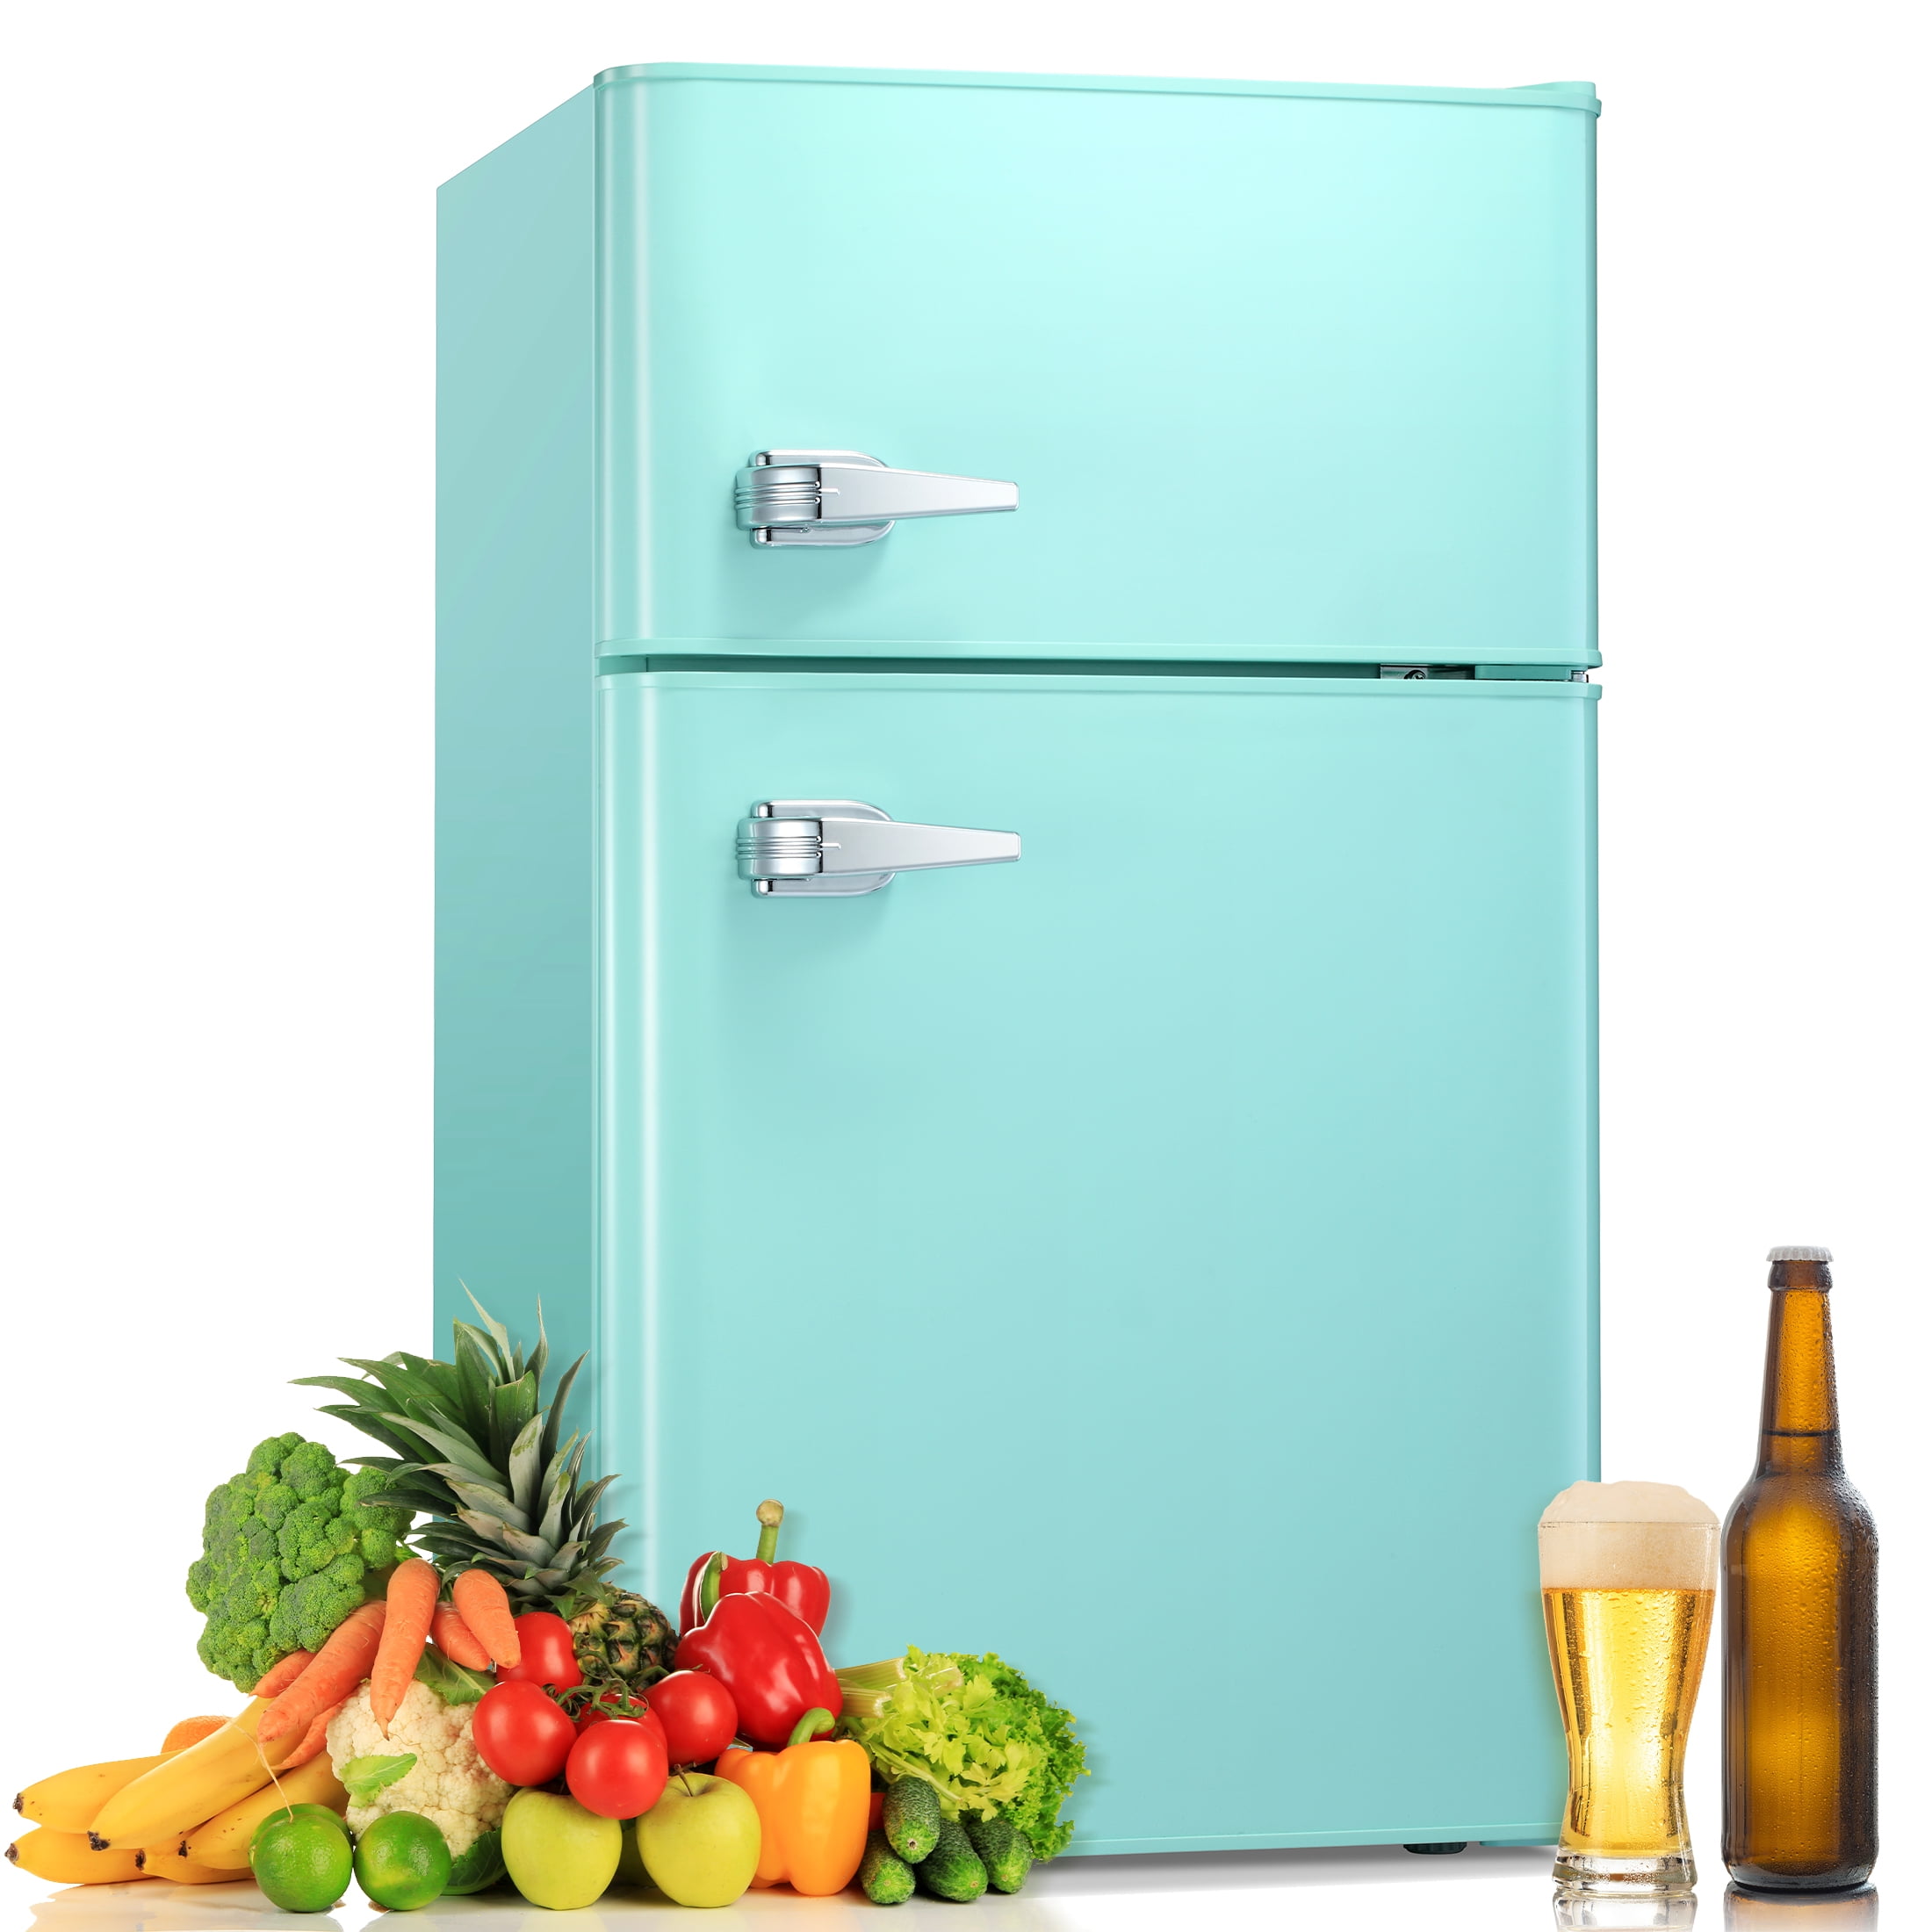 AAOBOSI 24 in. 1.1 cu.ft. Mini Refrigerator in Green with Compact Freezer and WiFi Enabled, Chest Fridge Freezer Cooler